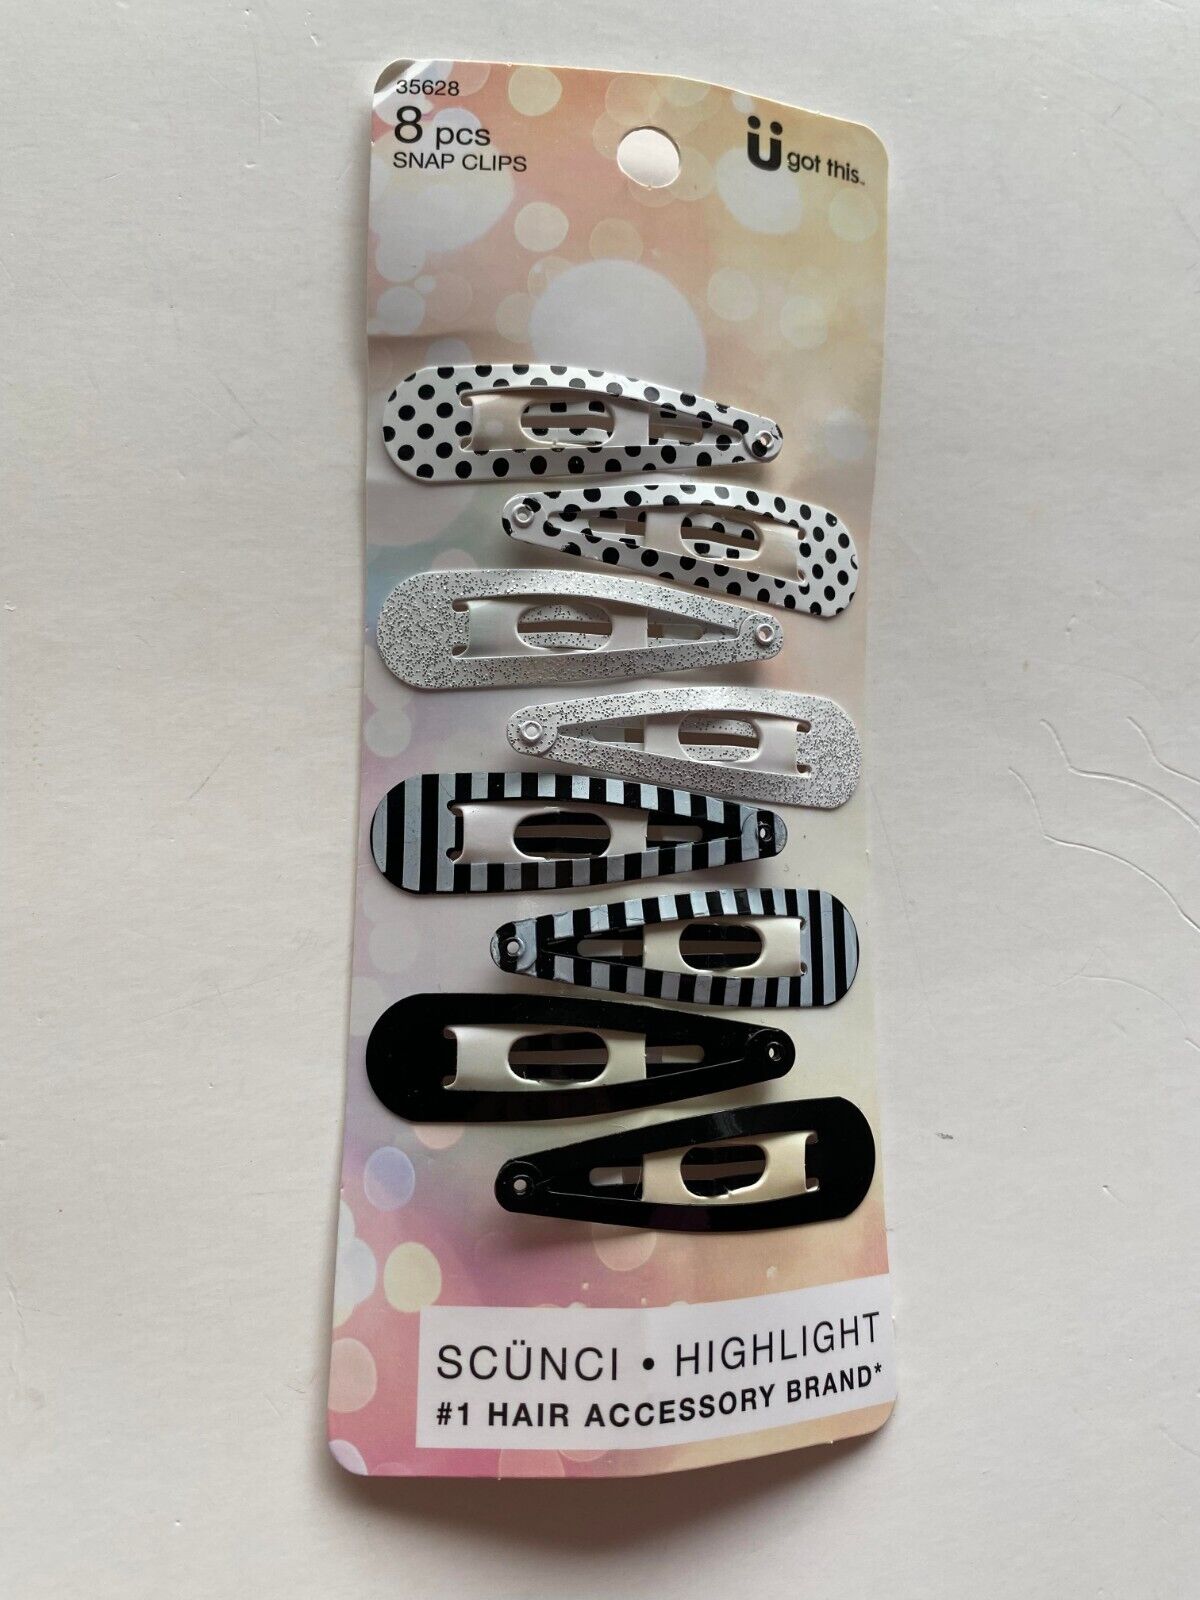 Scunci snap clips ( 8 pieces ) 35628 Women Girls hair clip beautiful color - Click Image to Close